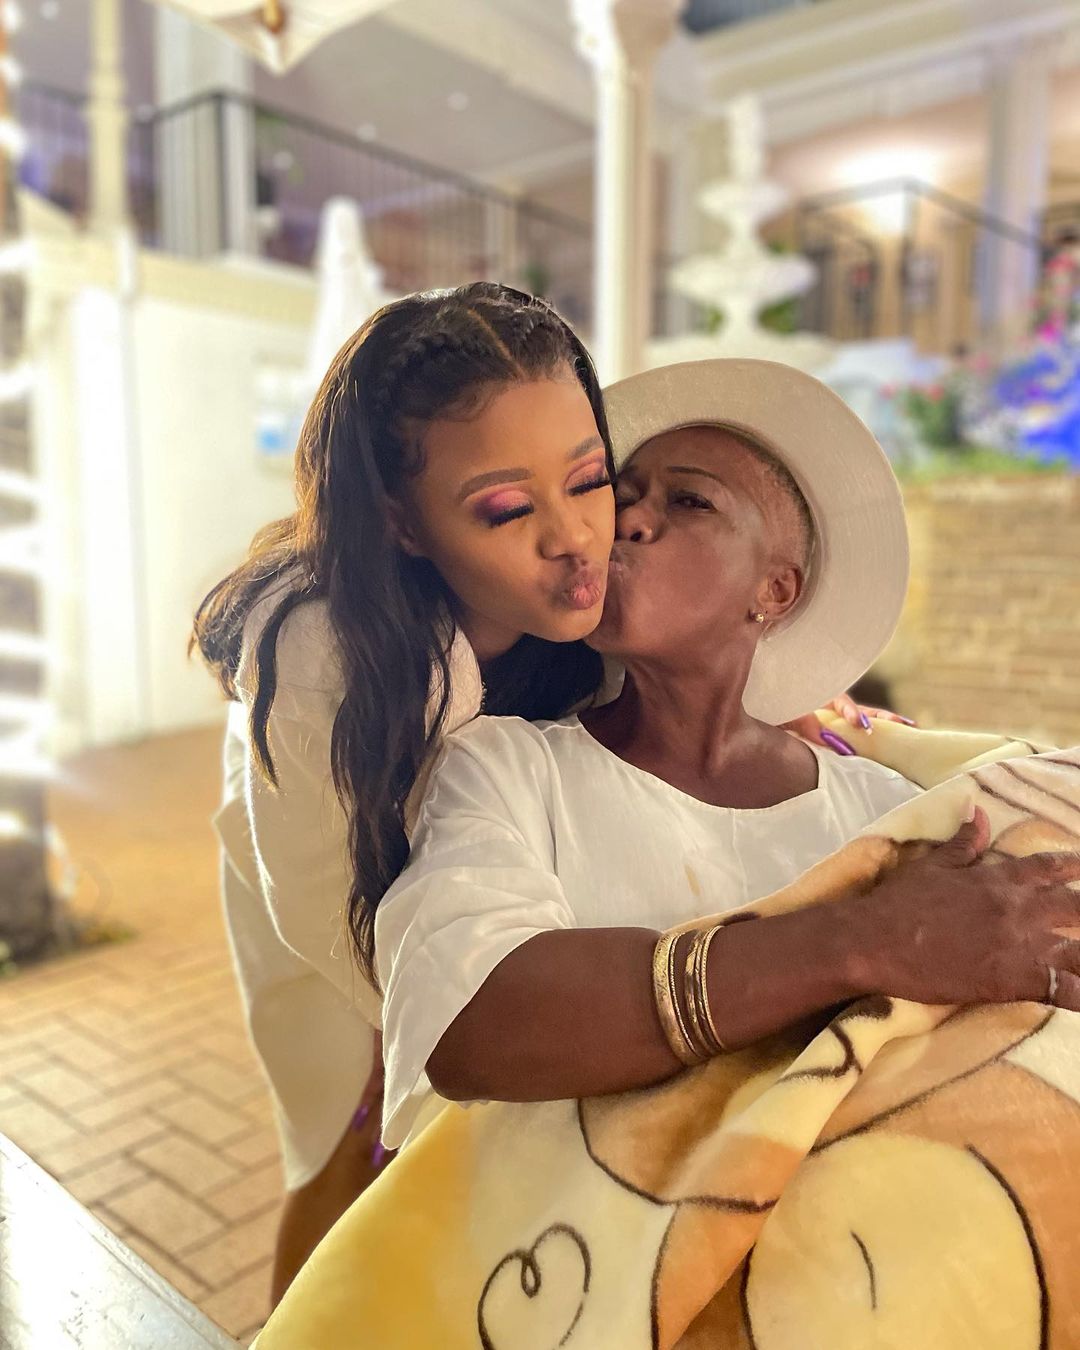 Babes Wodumo and Mampintsha's mother kiss to bury the hatchet after public fall out